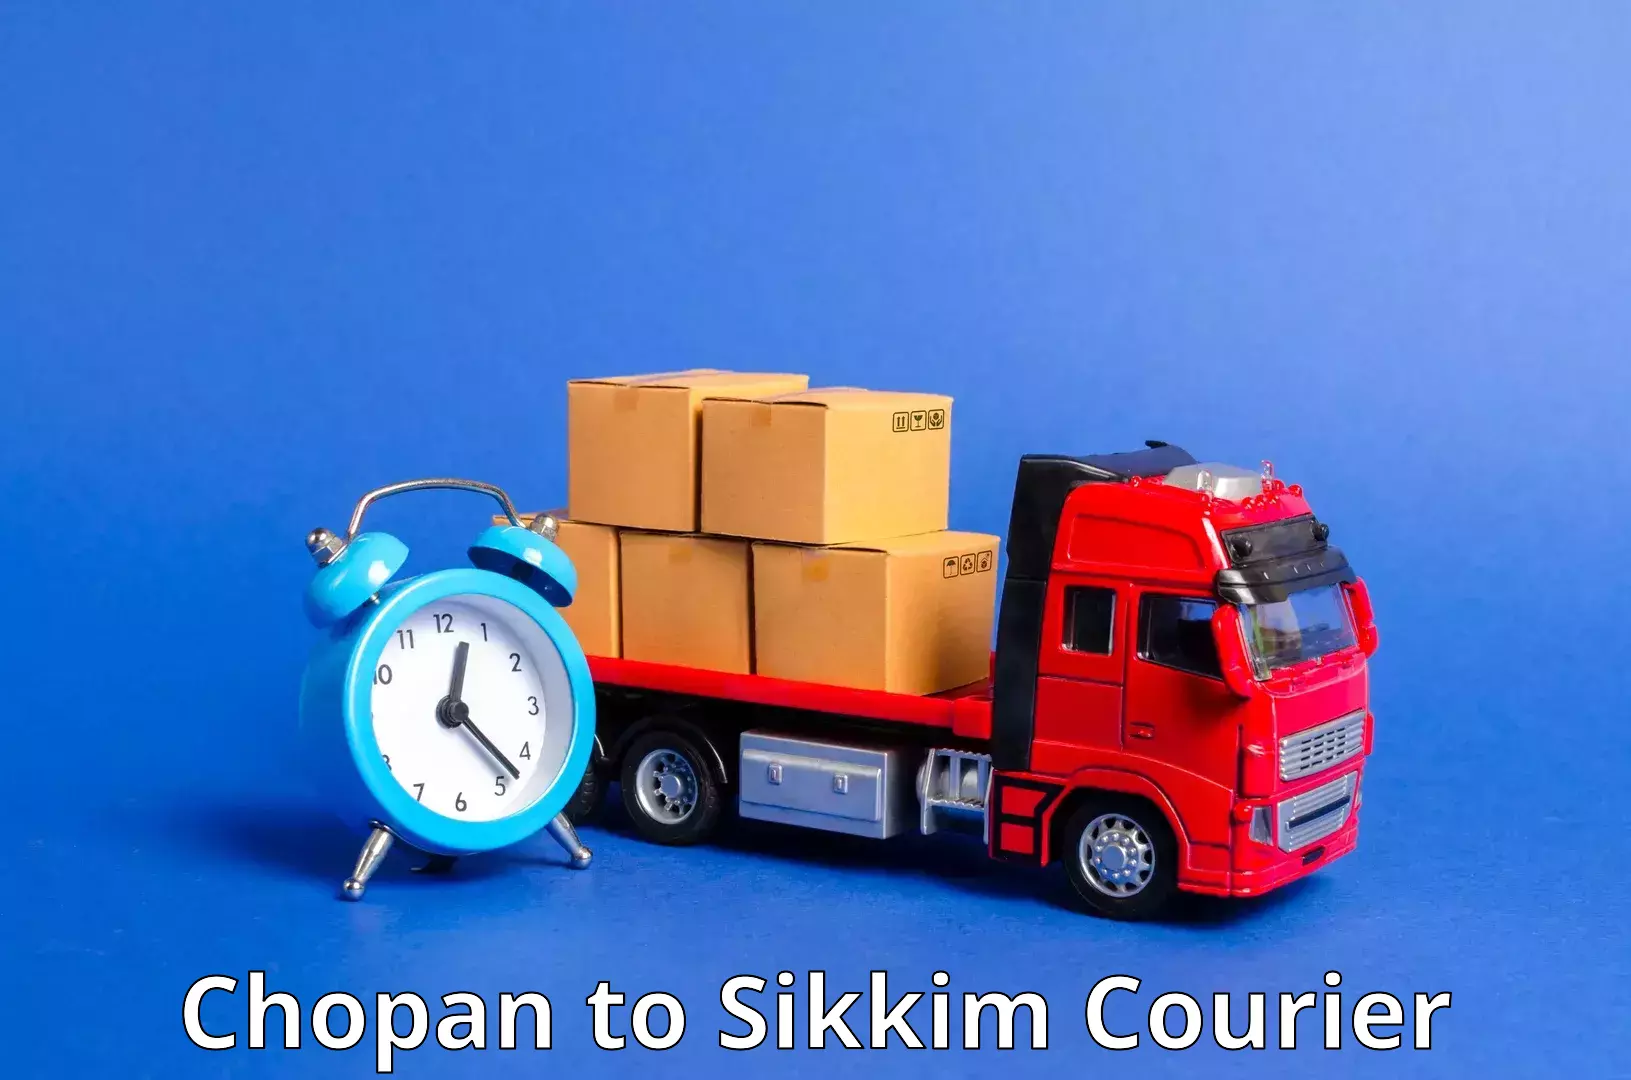 State-of-the-art courier technology Chopan to Sikkim